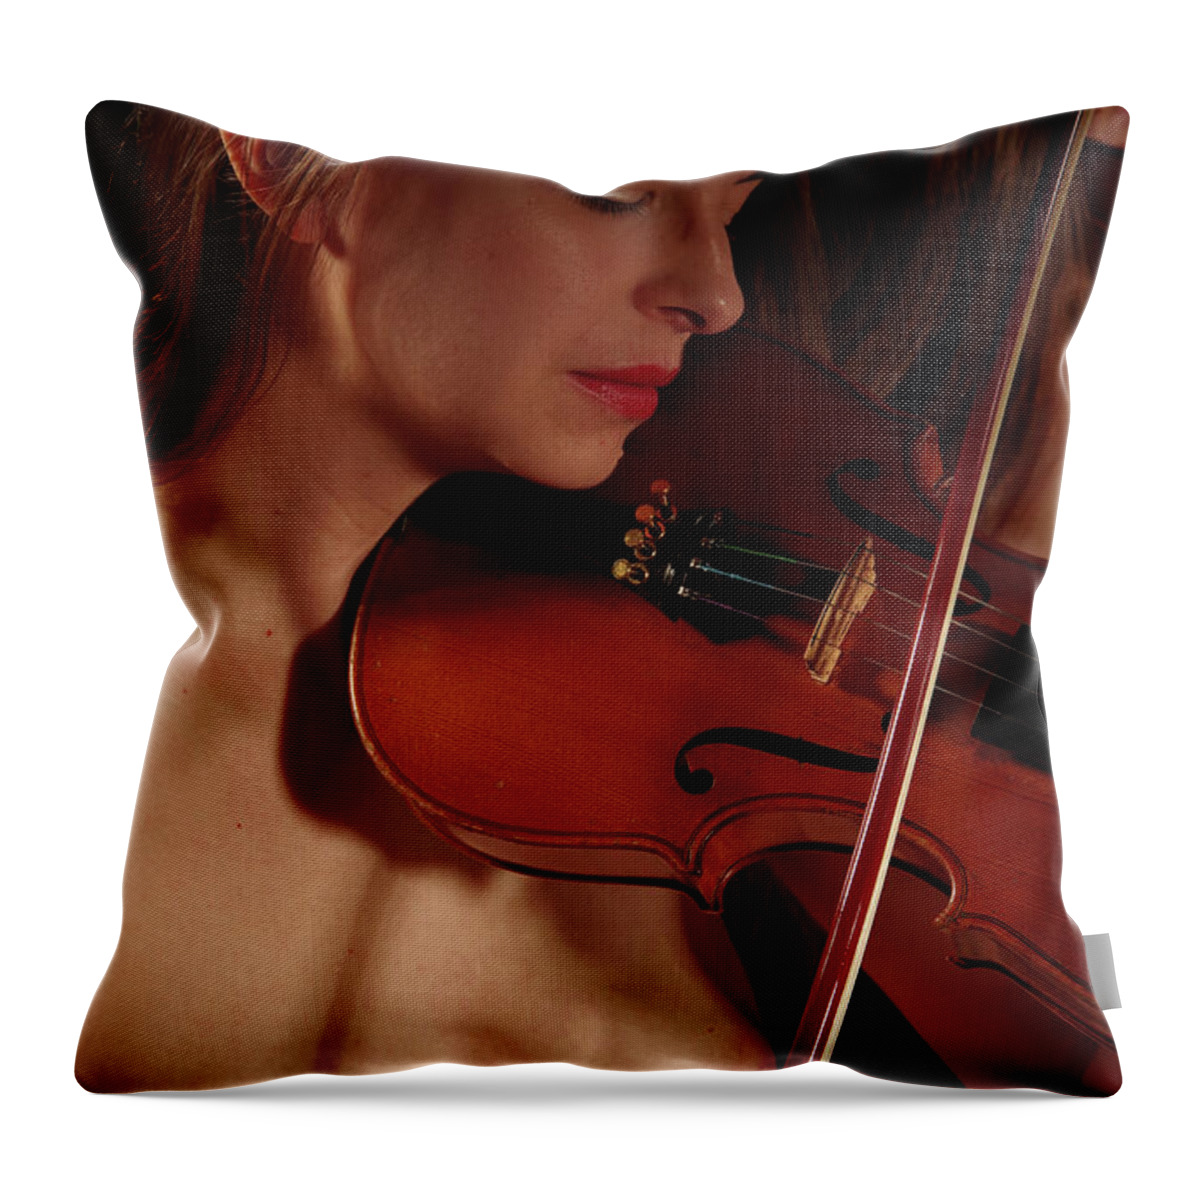 Nude Music Violin Throw Pillow featuring the photograph Kazt0935 by Henry Butz